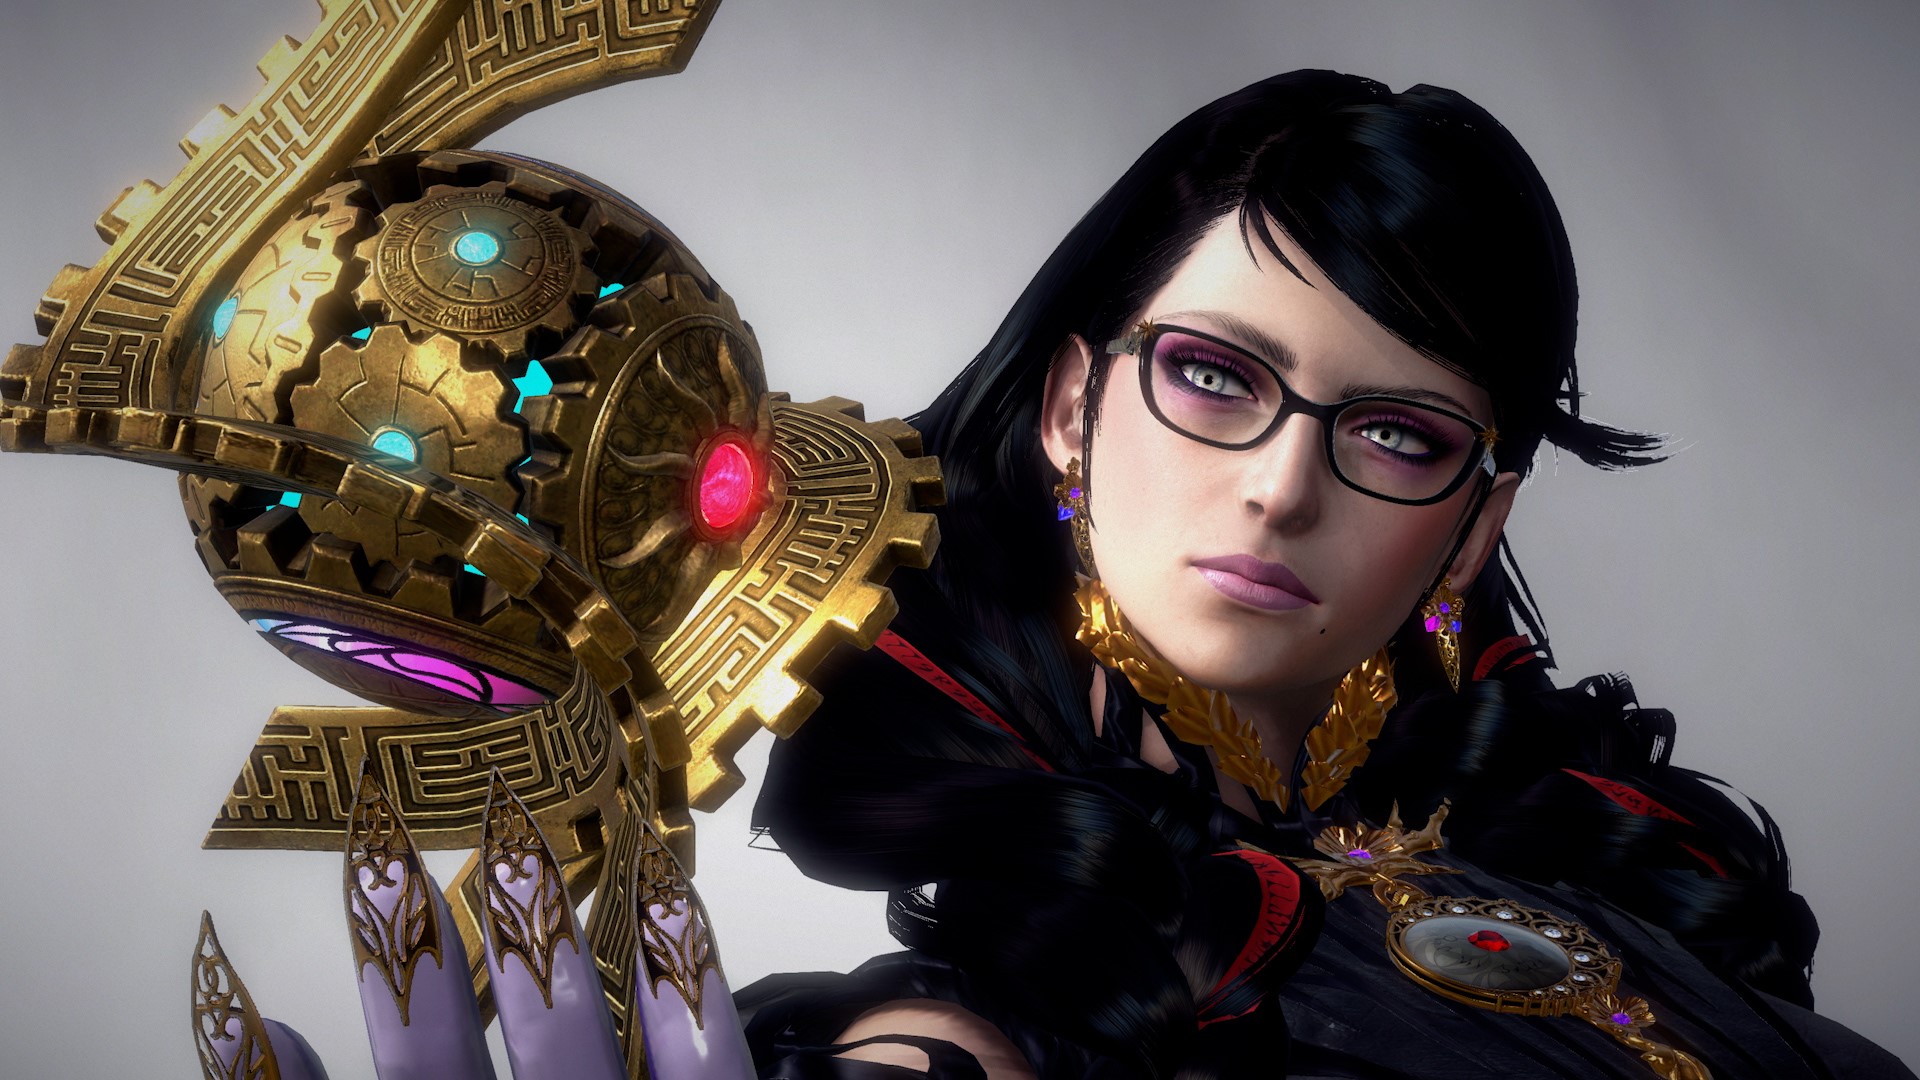 Bayonetta 3 will be released on October 28. The new trailer shows the second main character